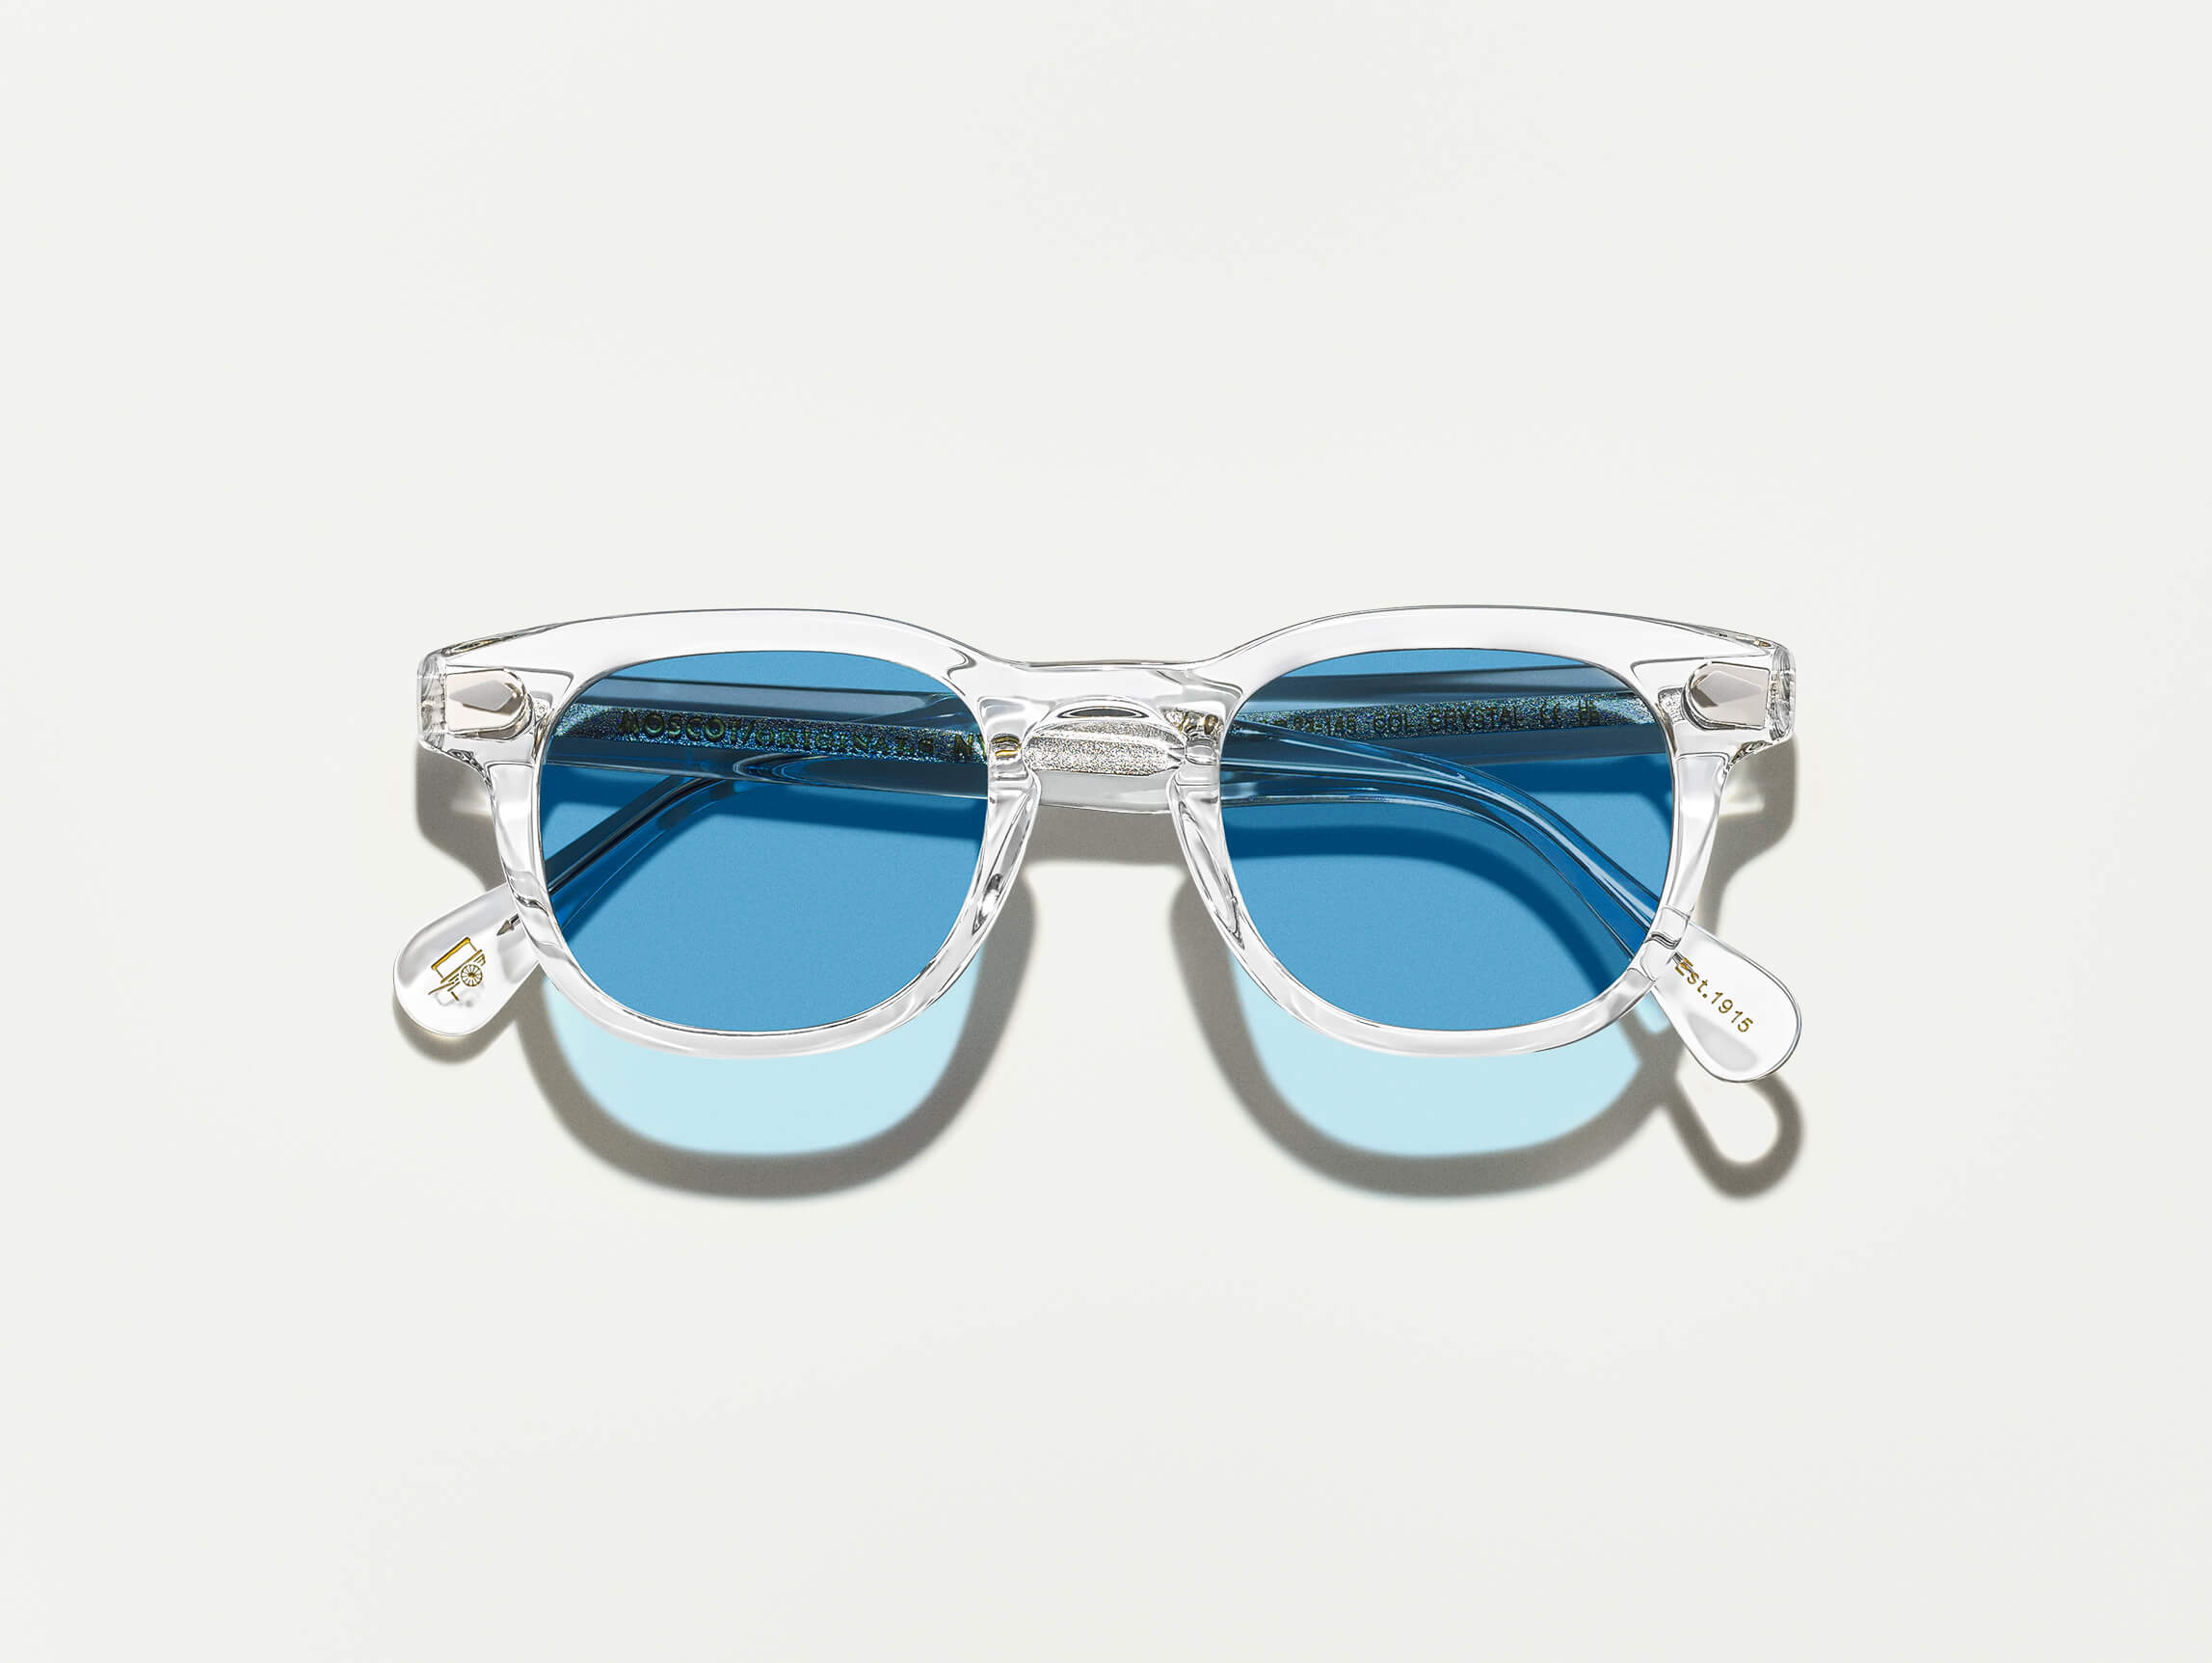 The GELT Crystal with Celebrity Blue Tinted Lenses